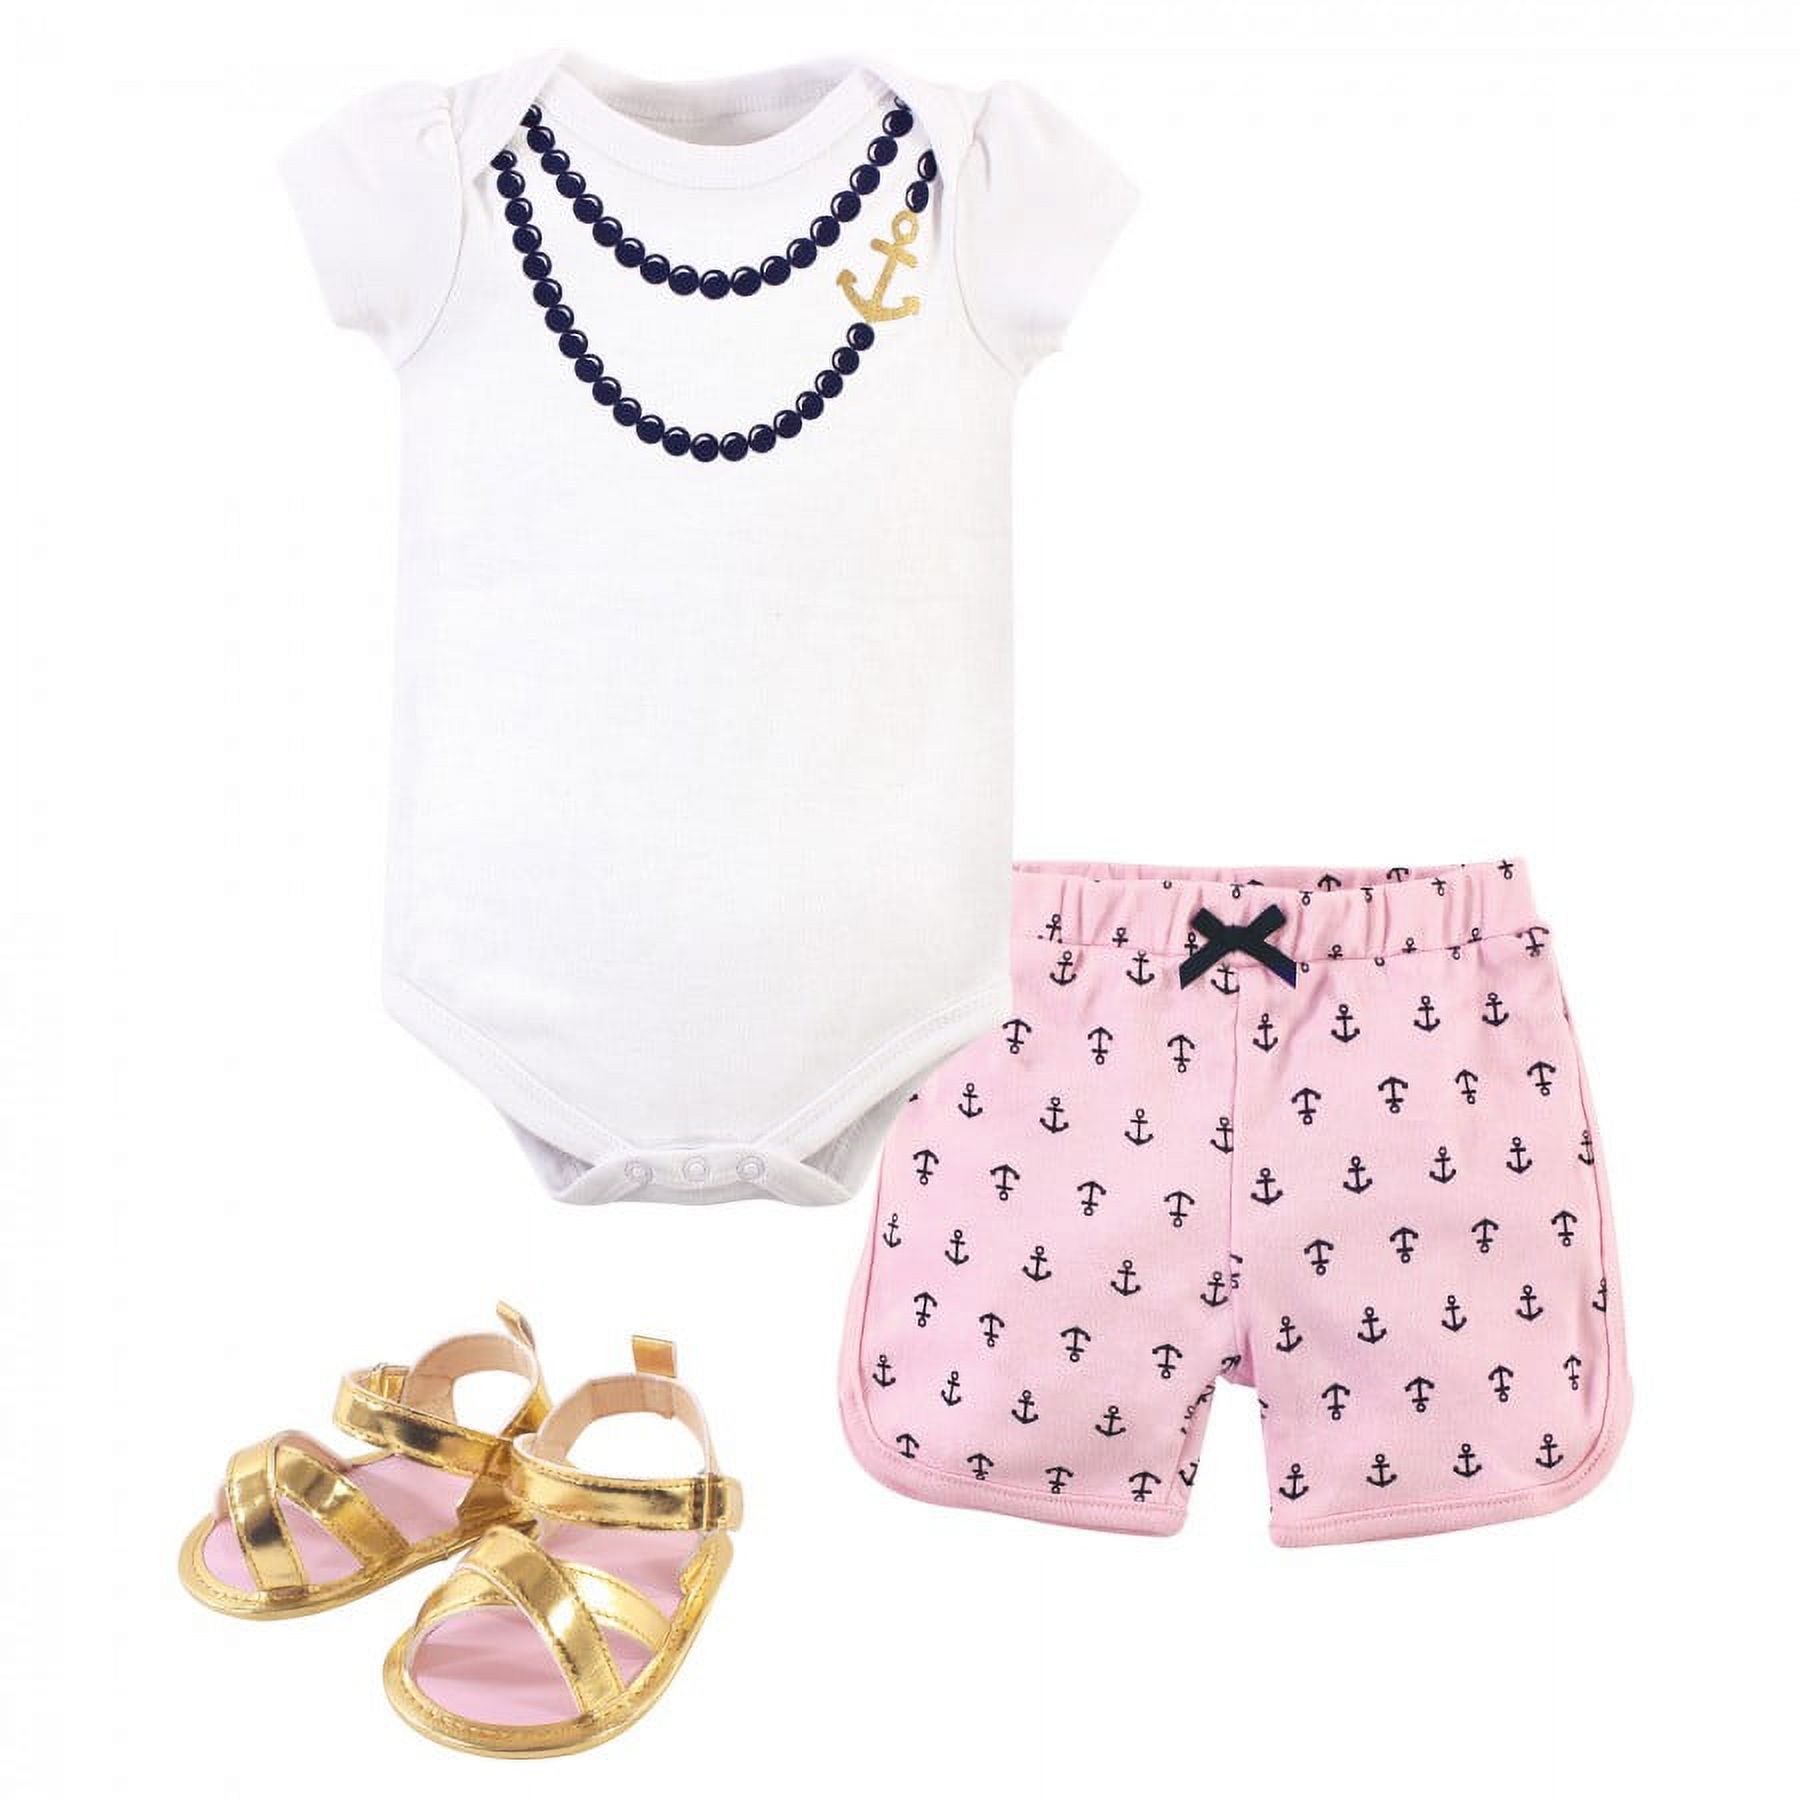 Little Treasure Baby Girl Cotton Bodysuit, Pant and Shoe 3pc Set, Anchor Necklace, 6-9 Months - image 1 of 4